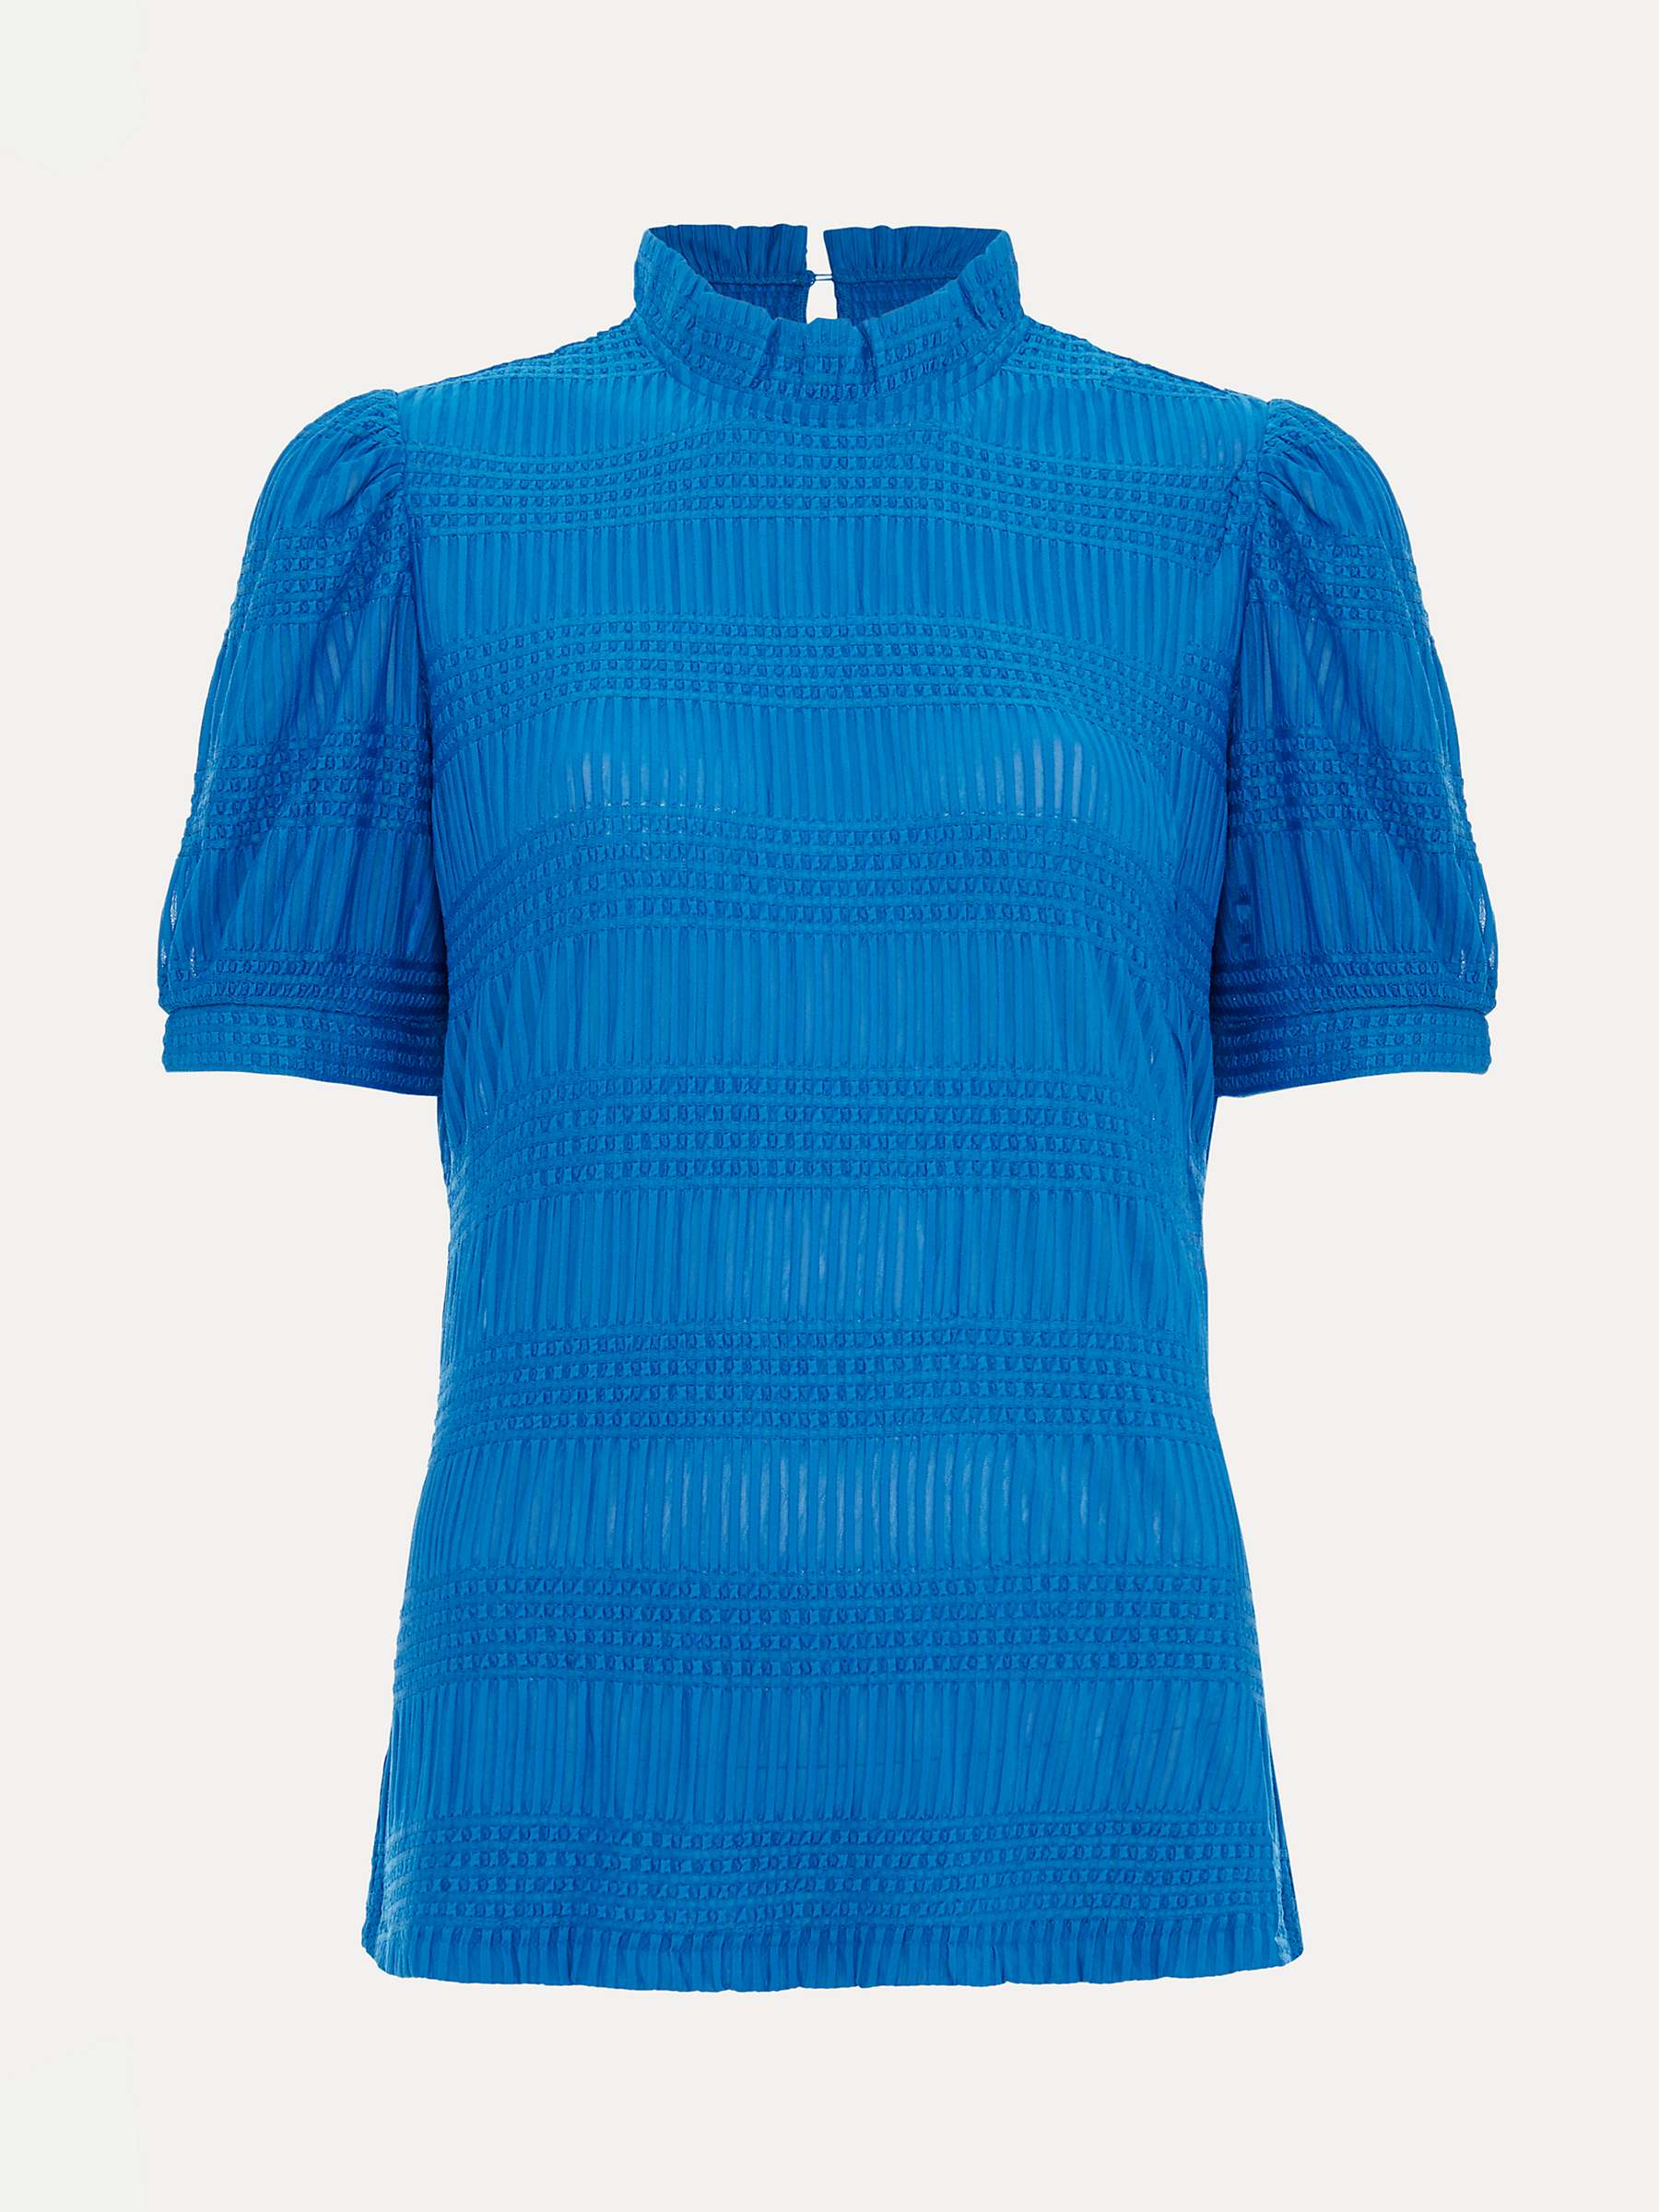 Buy Phase Eight Samiha High Neck Textured Top Online at johnlewis.com